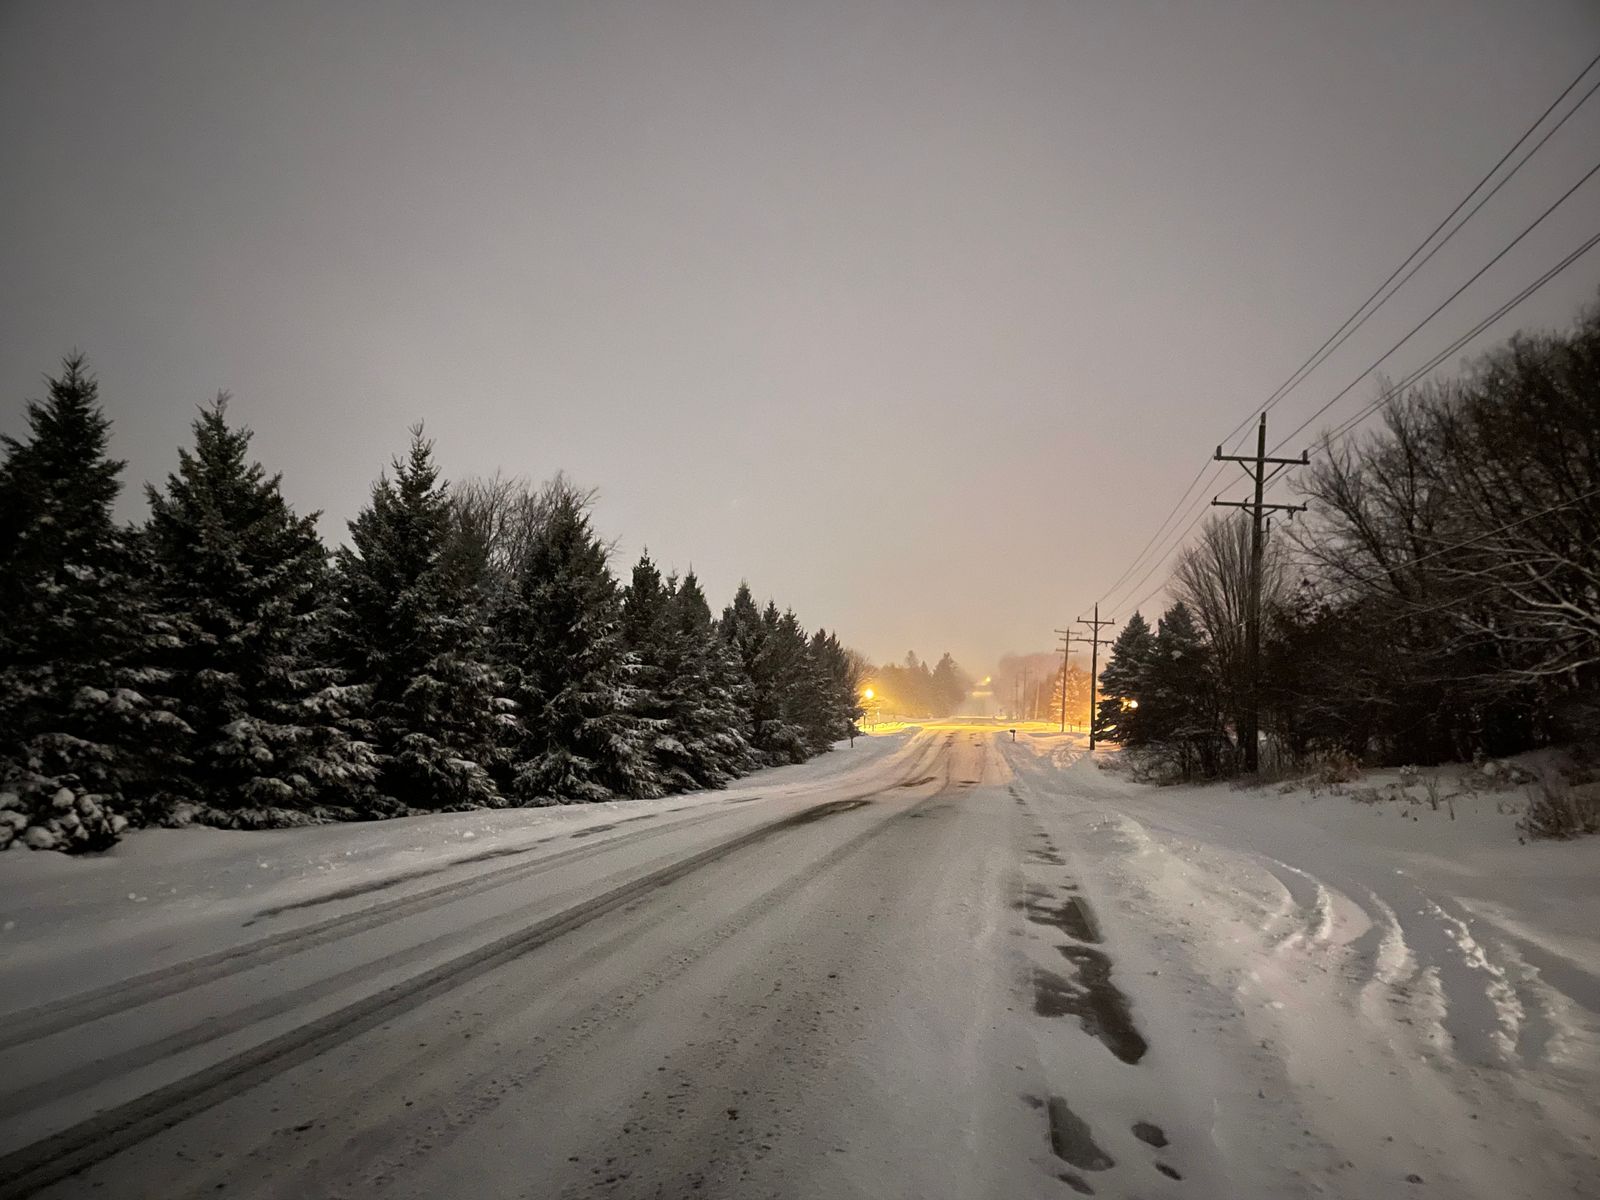 Road covered in snow at night